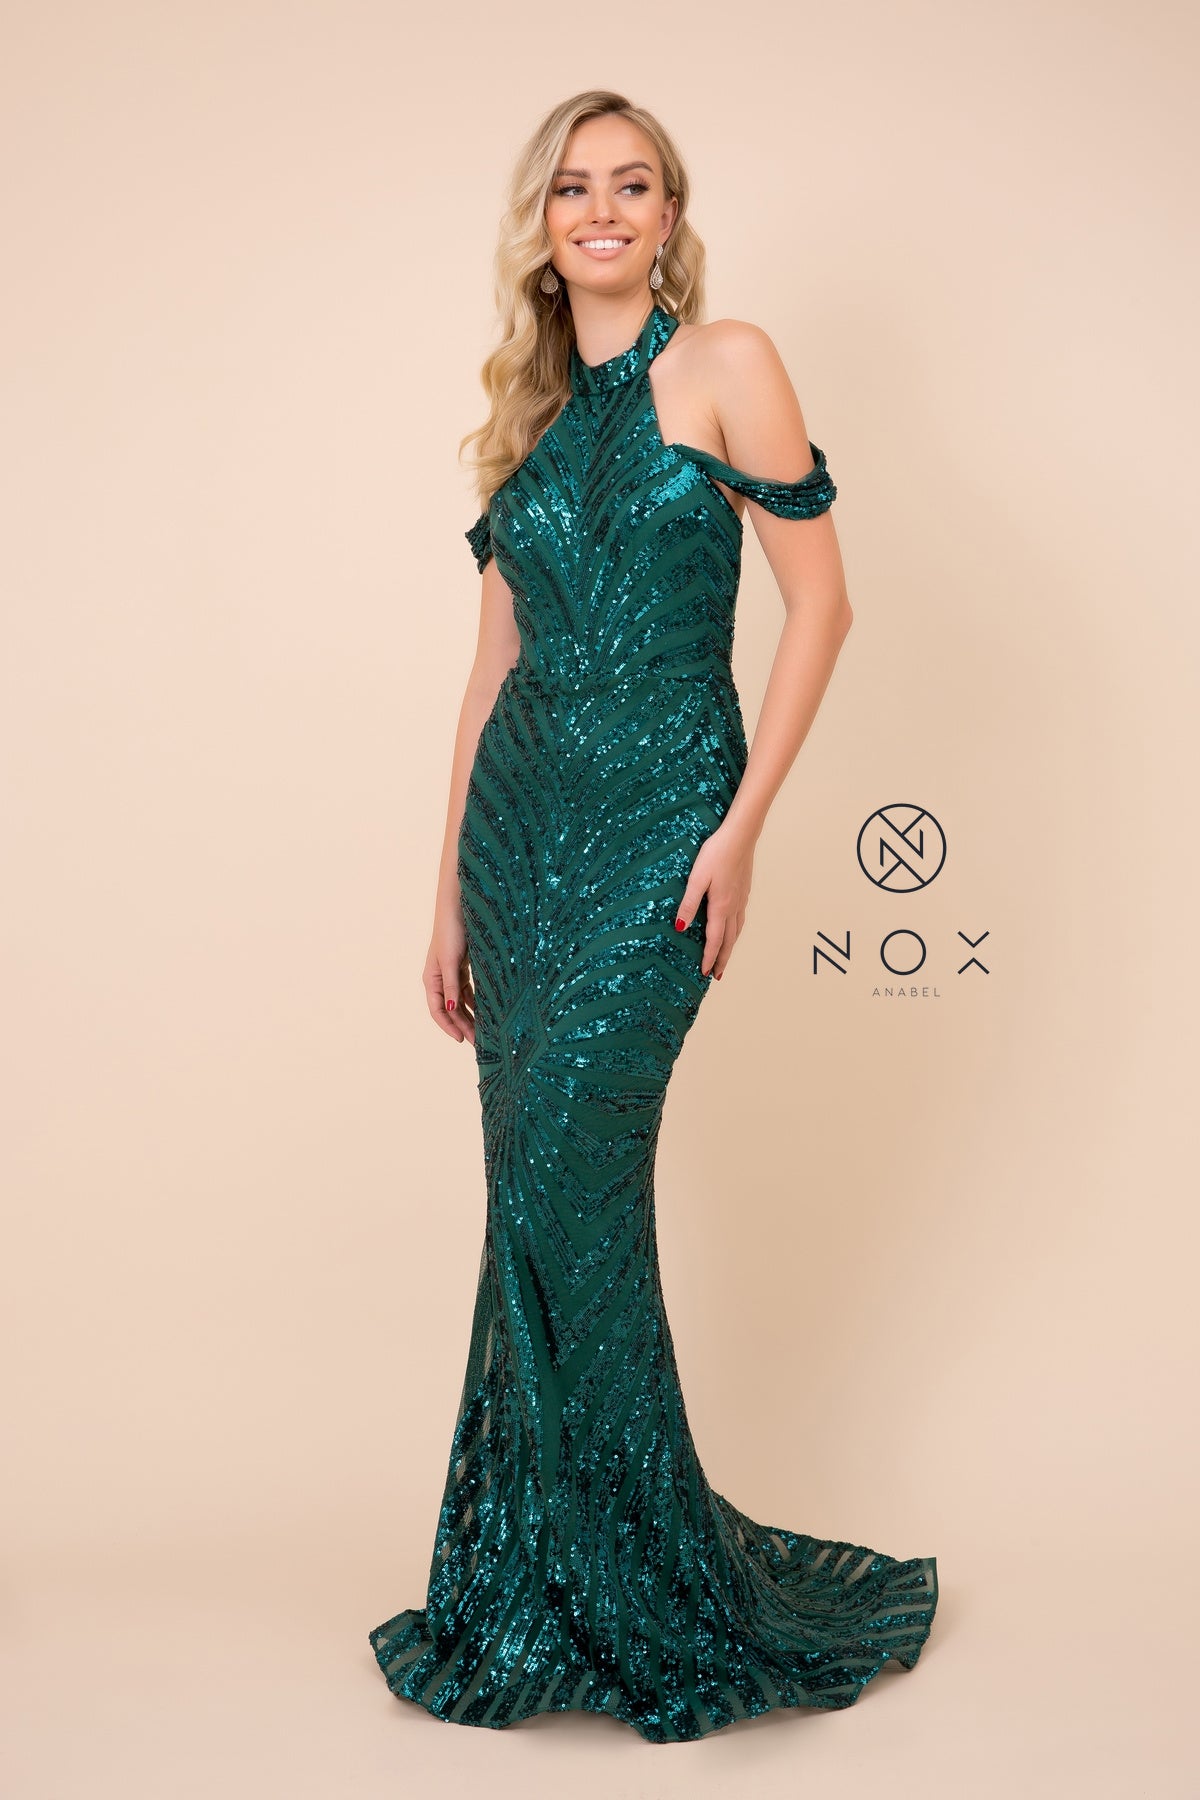 MyFashion.com - FULL-LENGTH COLD SHOULDER MERMAID DRESS WITH OPEN BACK (E377) - Nox Anabel promdress eveningdress fashion partydress weddingdress 
 gown homecoming promgown weddinggown 